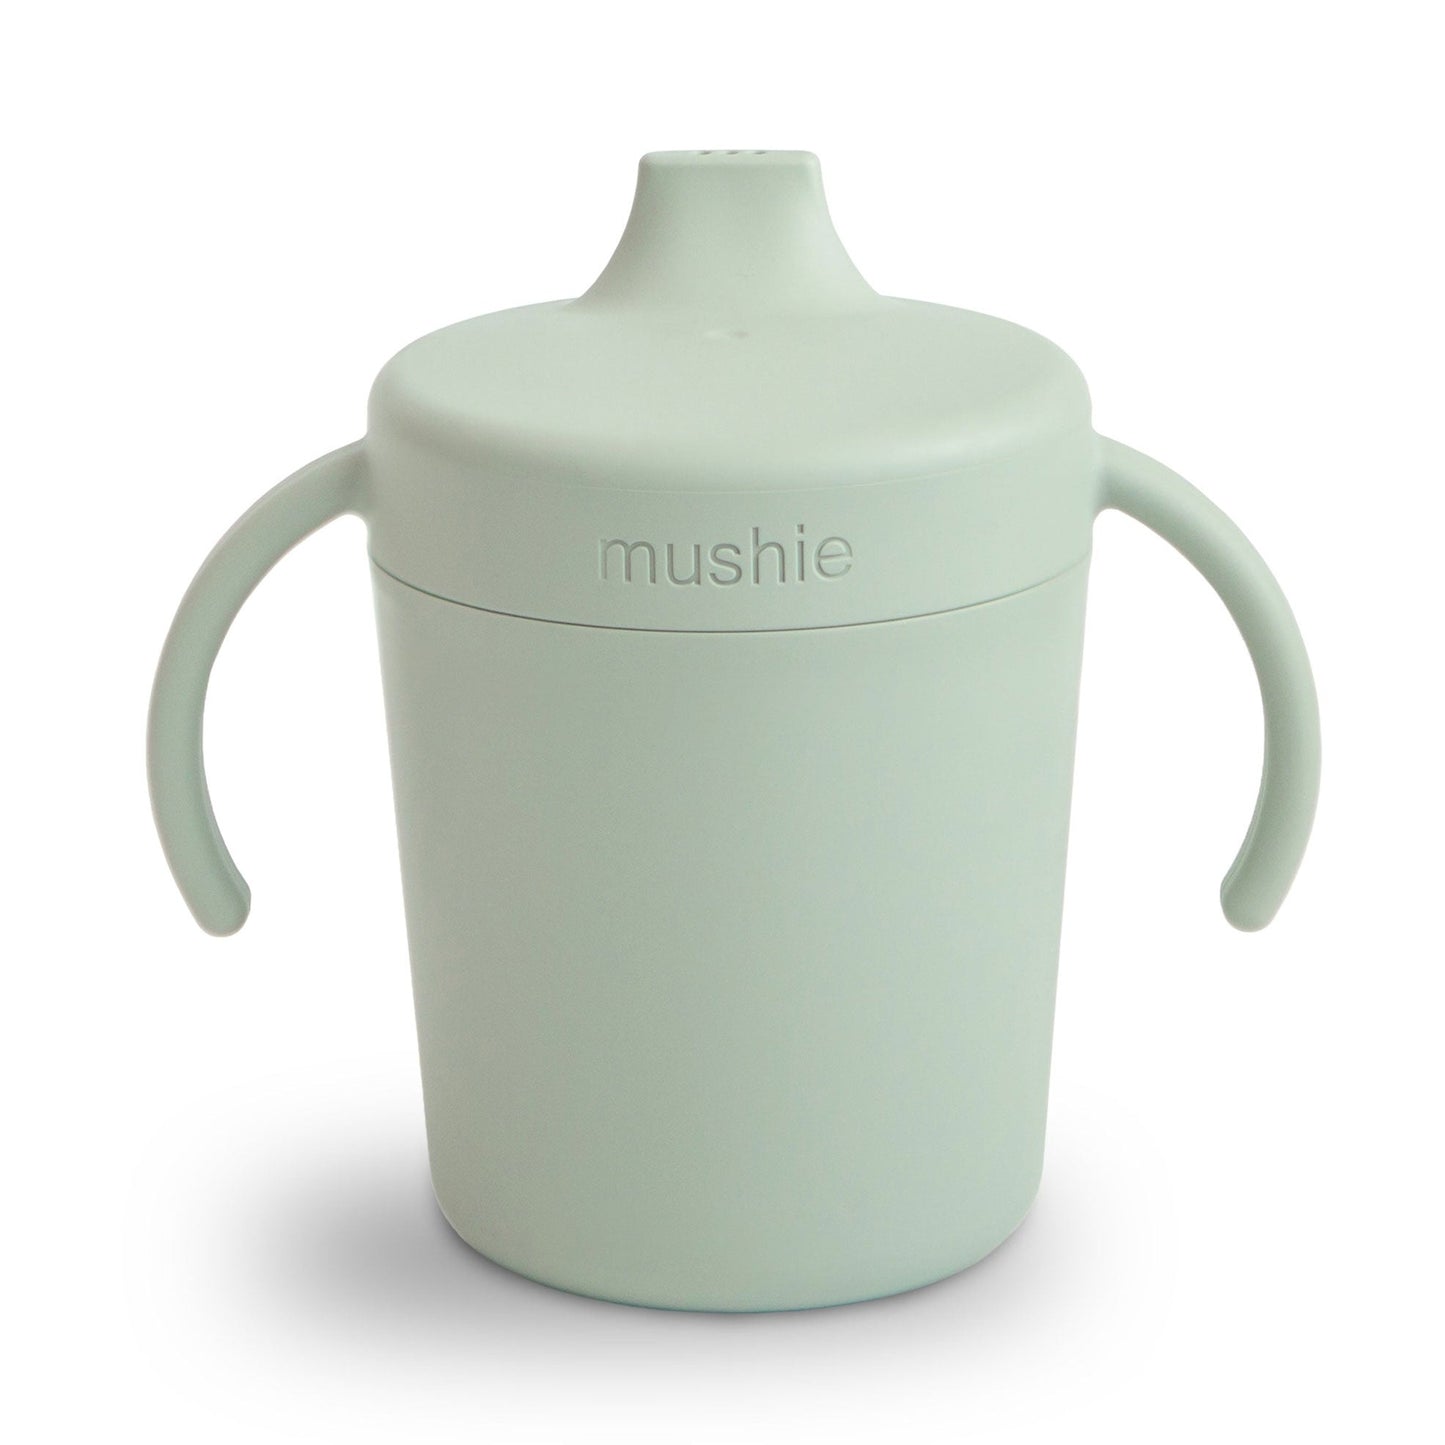 Mushie Trainer Sippy Cup - Sage